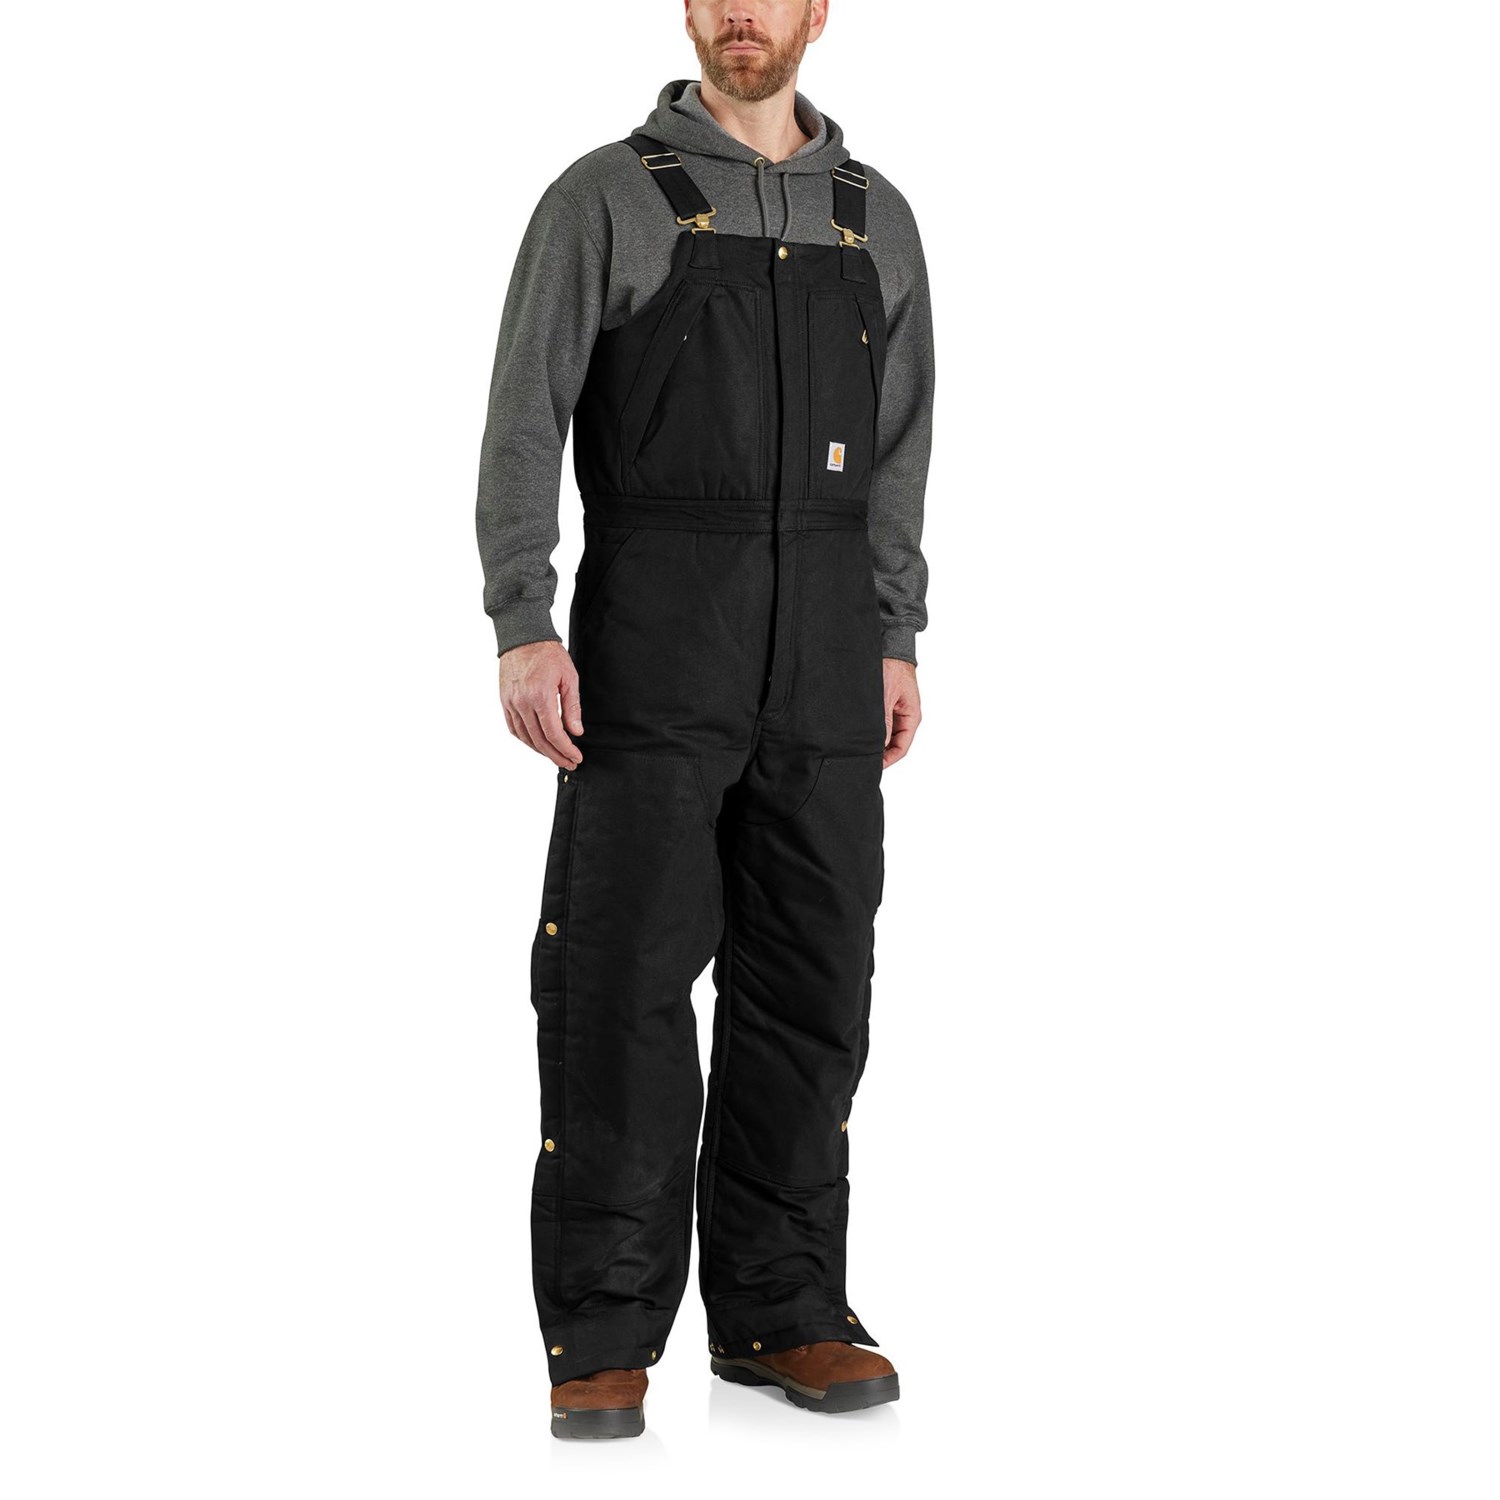 Carhartt 105470 Loose Fit Firm Duck Bib Overalls for Men | Black | Size XL/Small